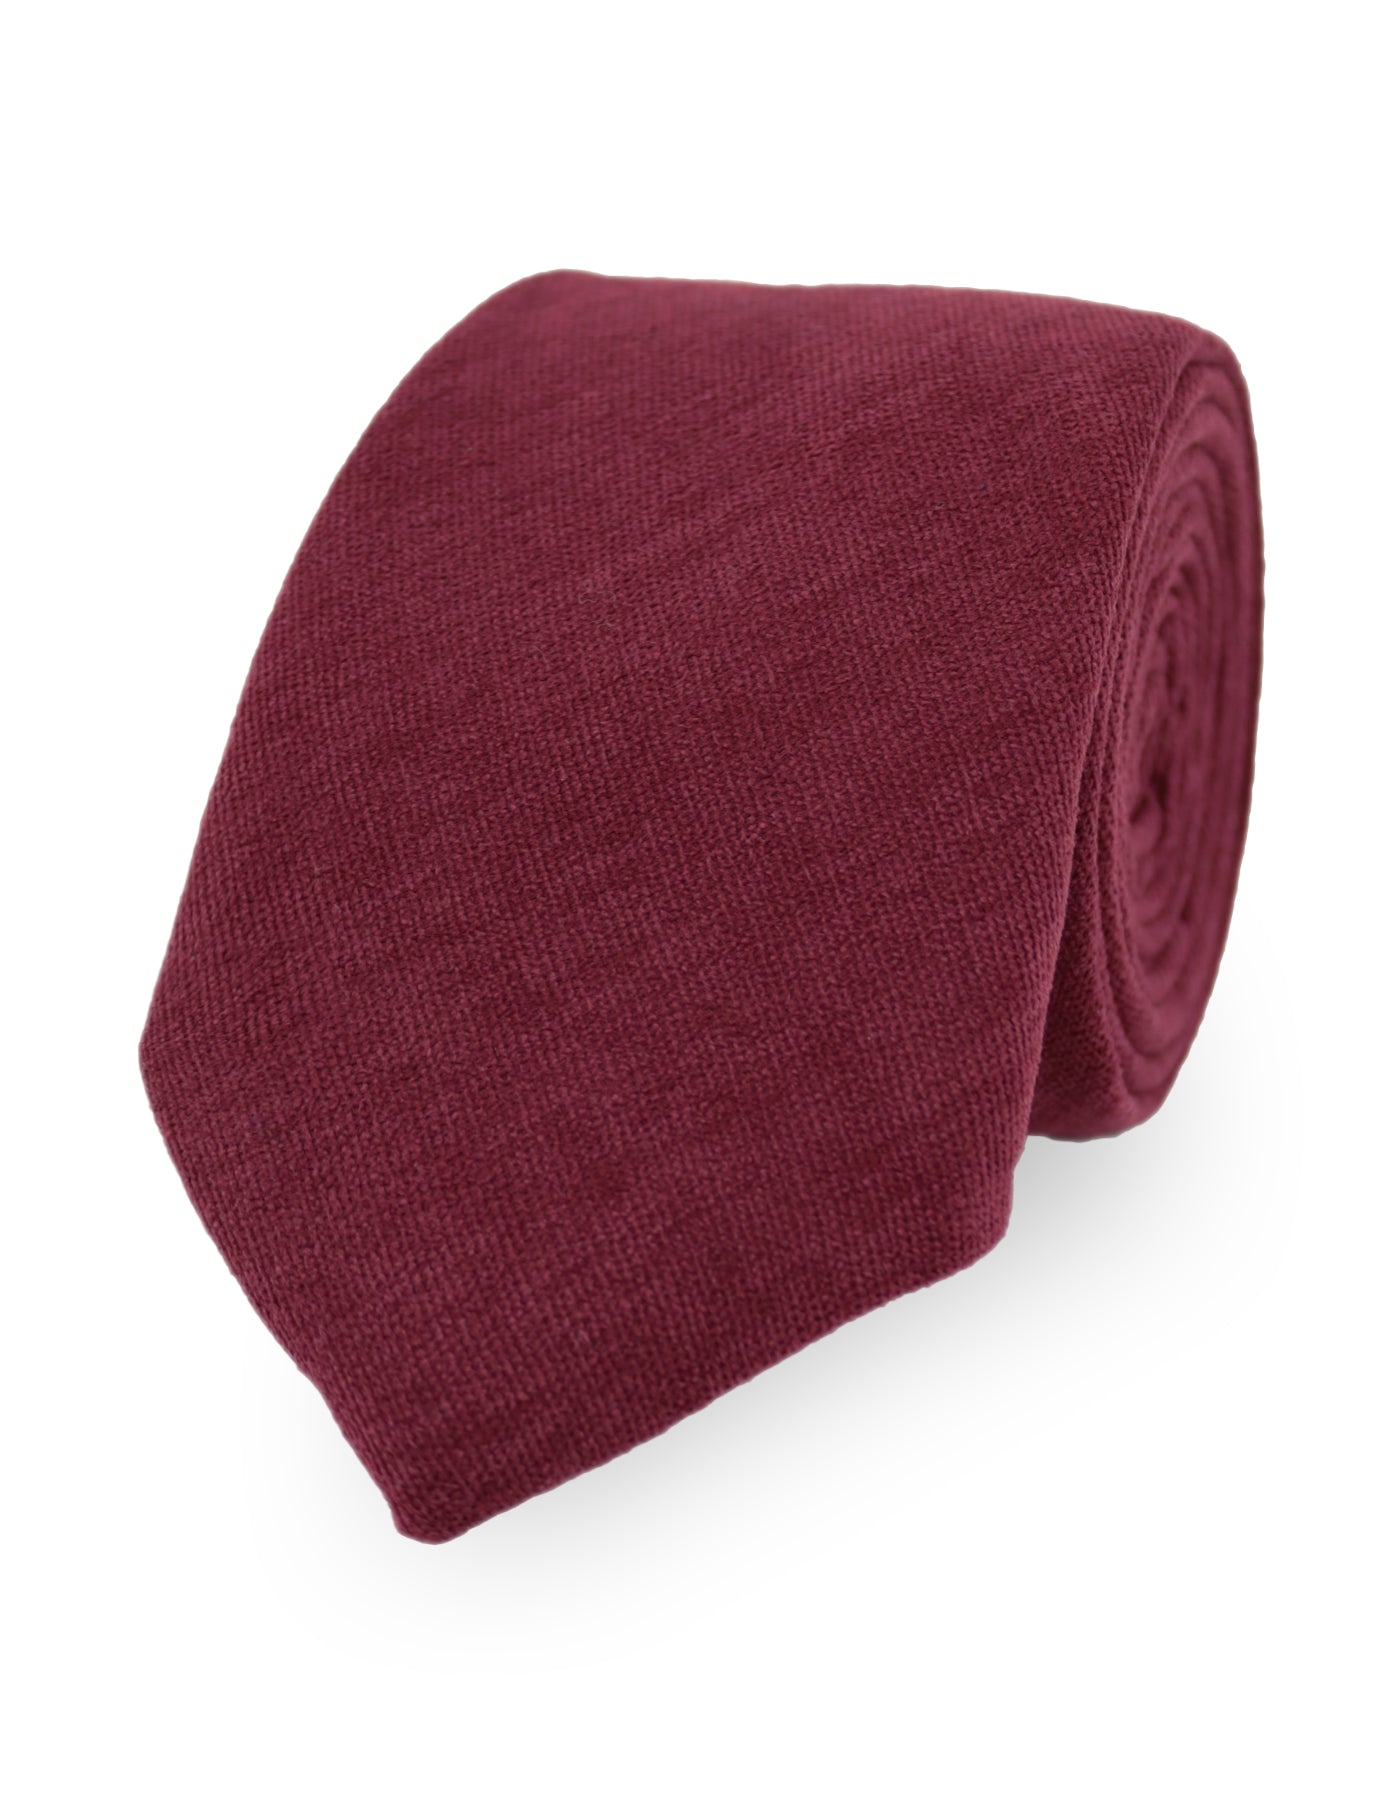 100% Brushed Cotton Suede Bow Tie - Burgundy Red